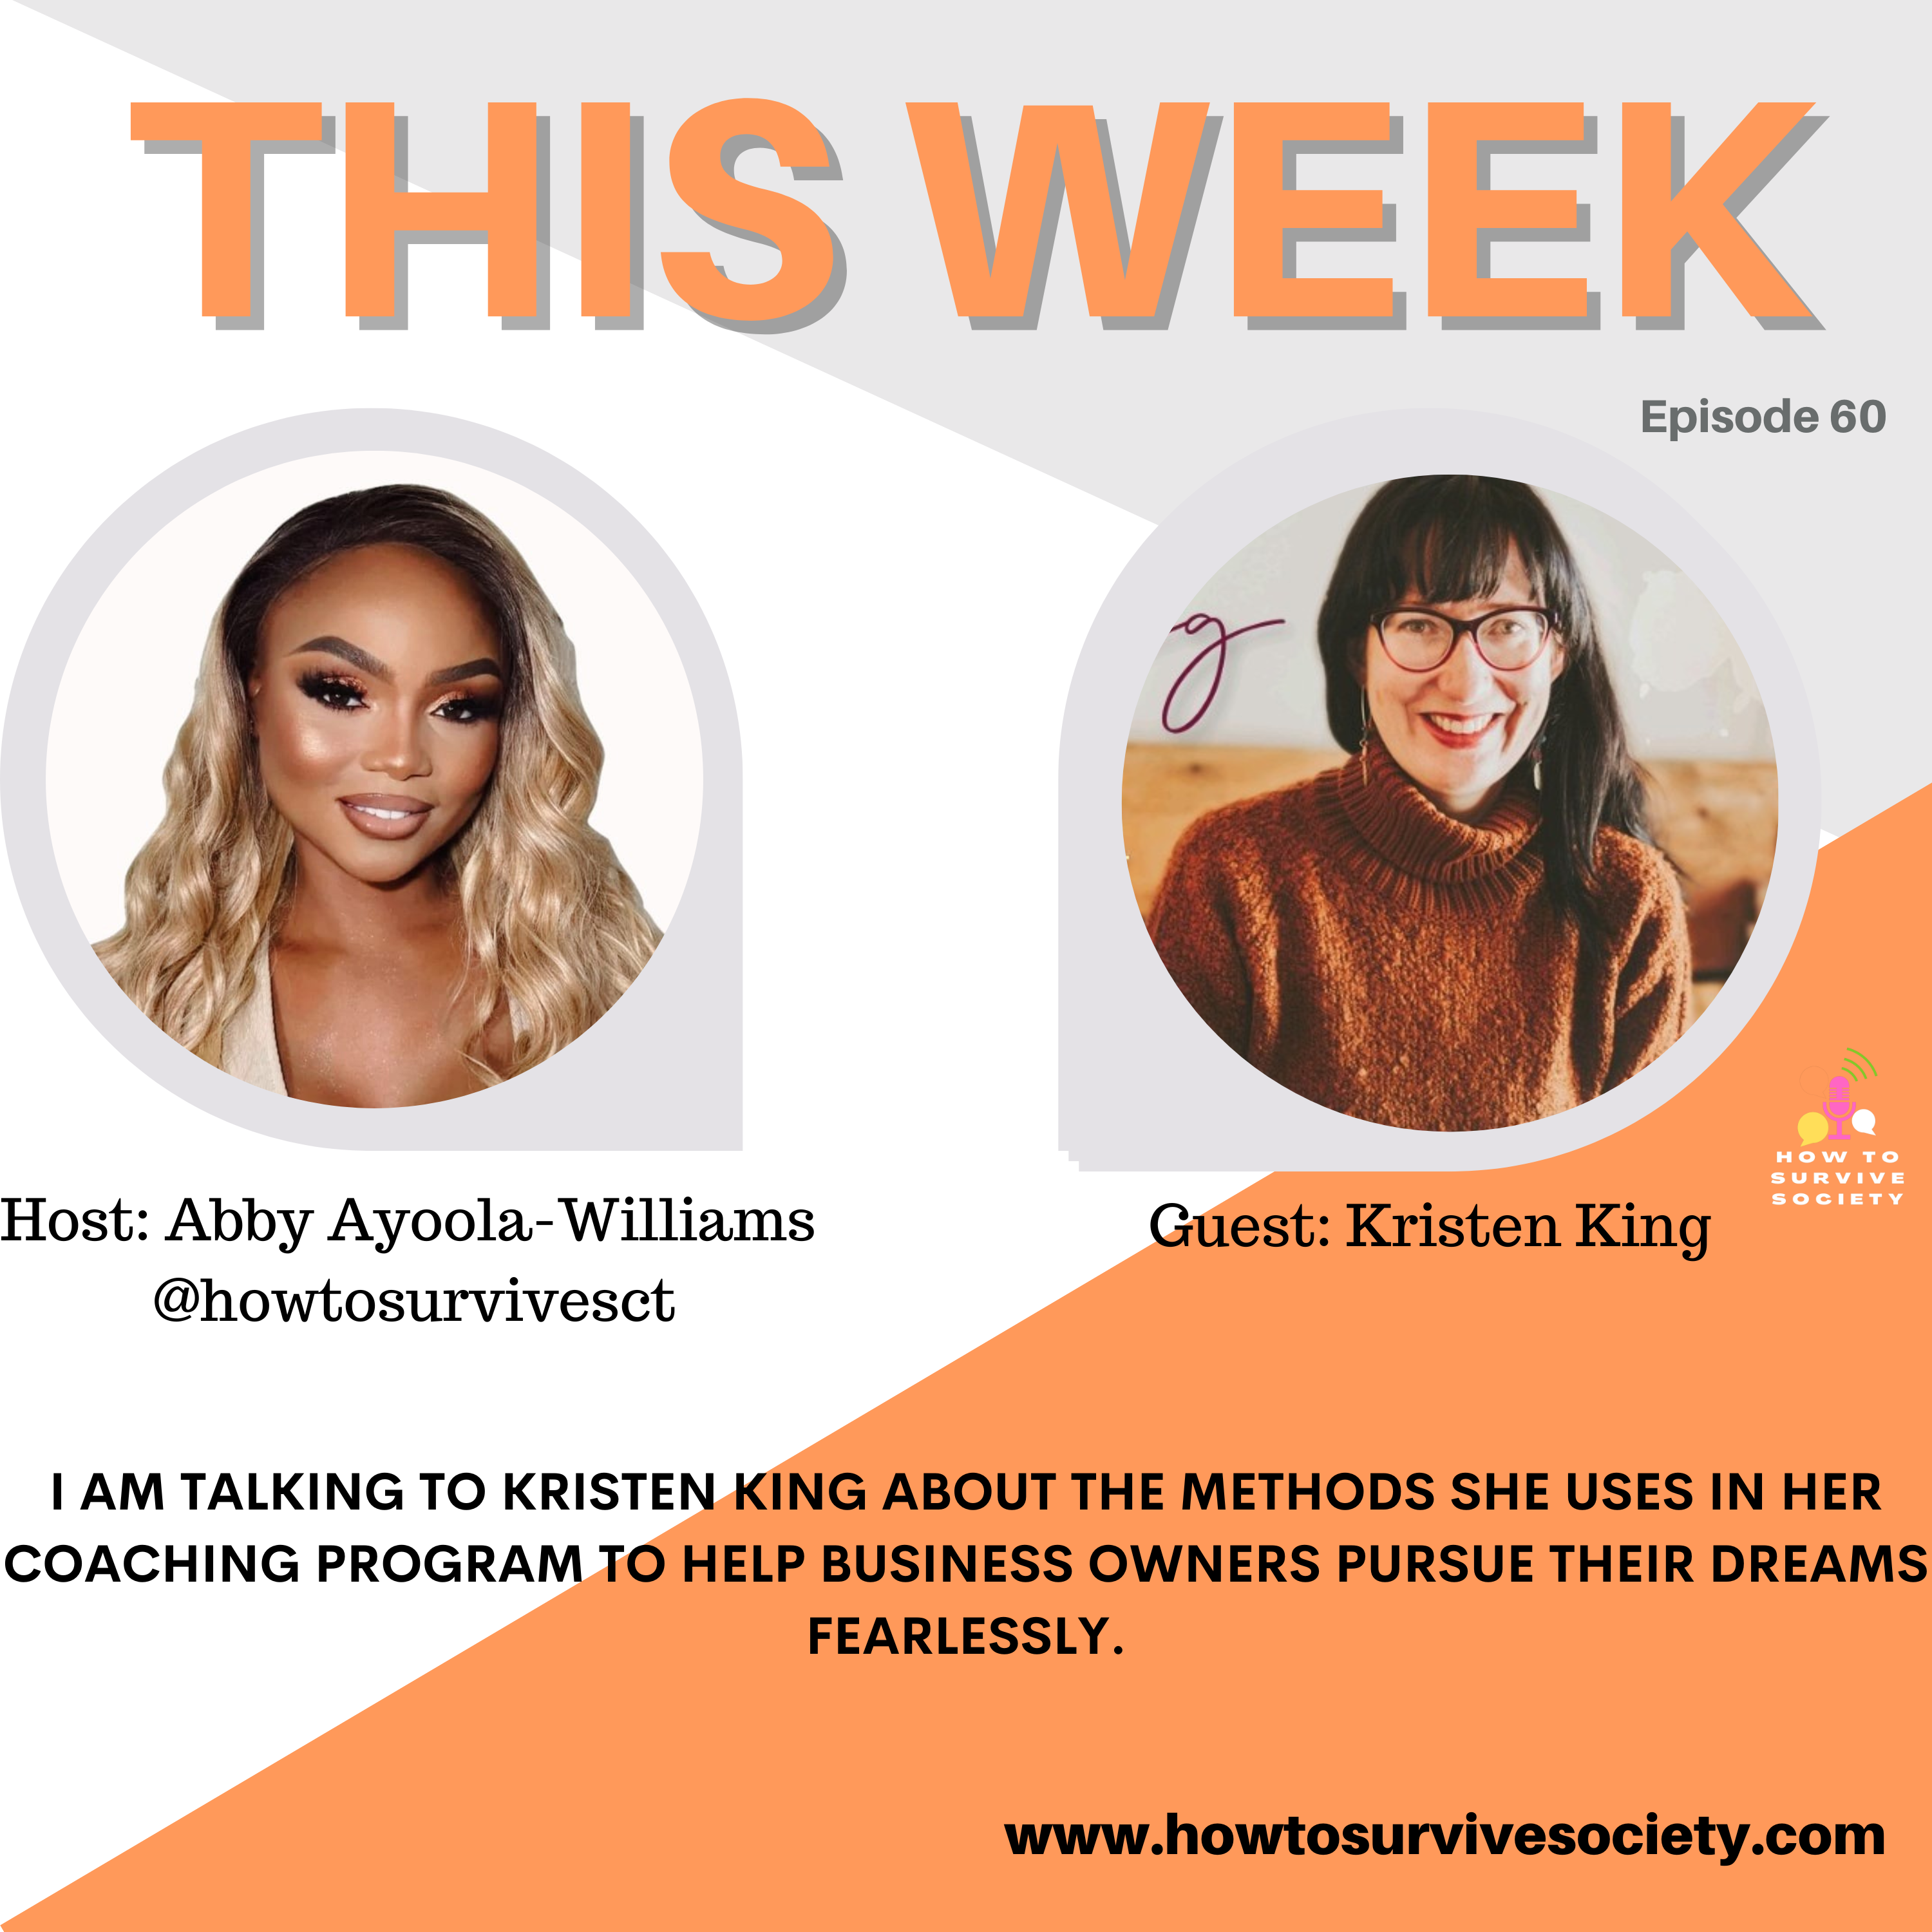 New Interview: Methods to Help Business Owners Pursue Their Dreams Fearlessly with Kristen King on the How to Survive Society Podcast